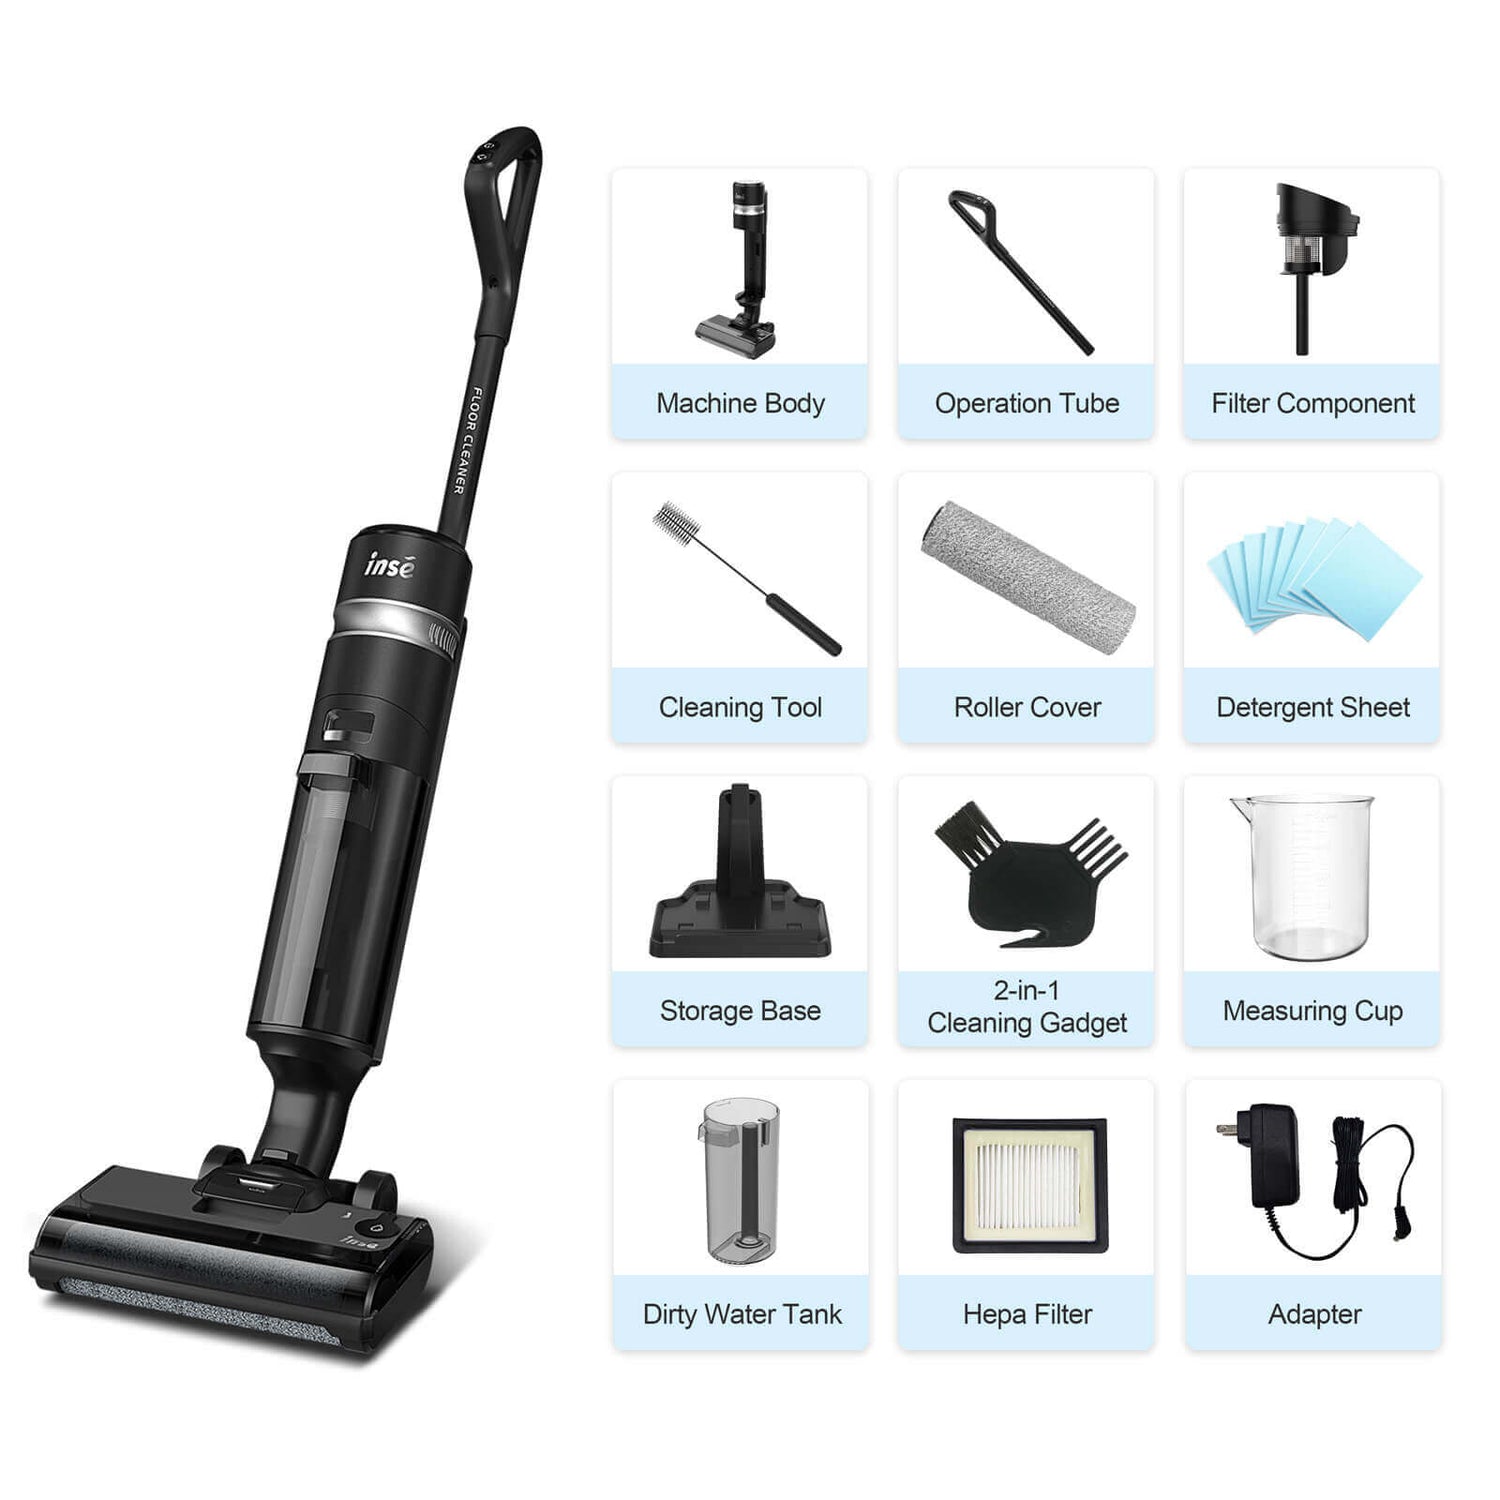 All in one sweep, mopping, and washes, smart cordless handheld wet-dry vac